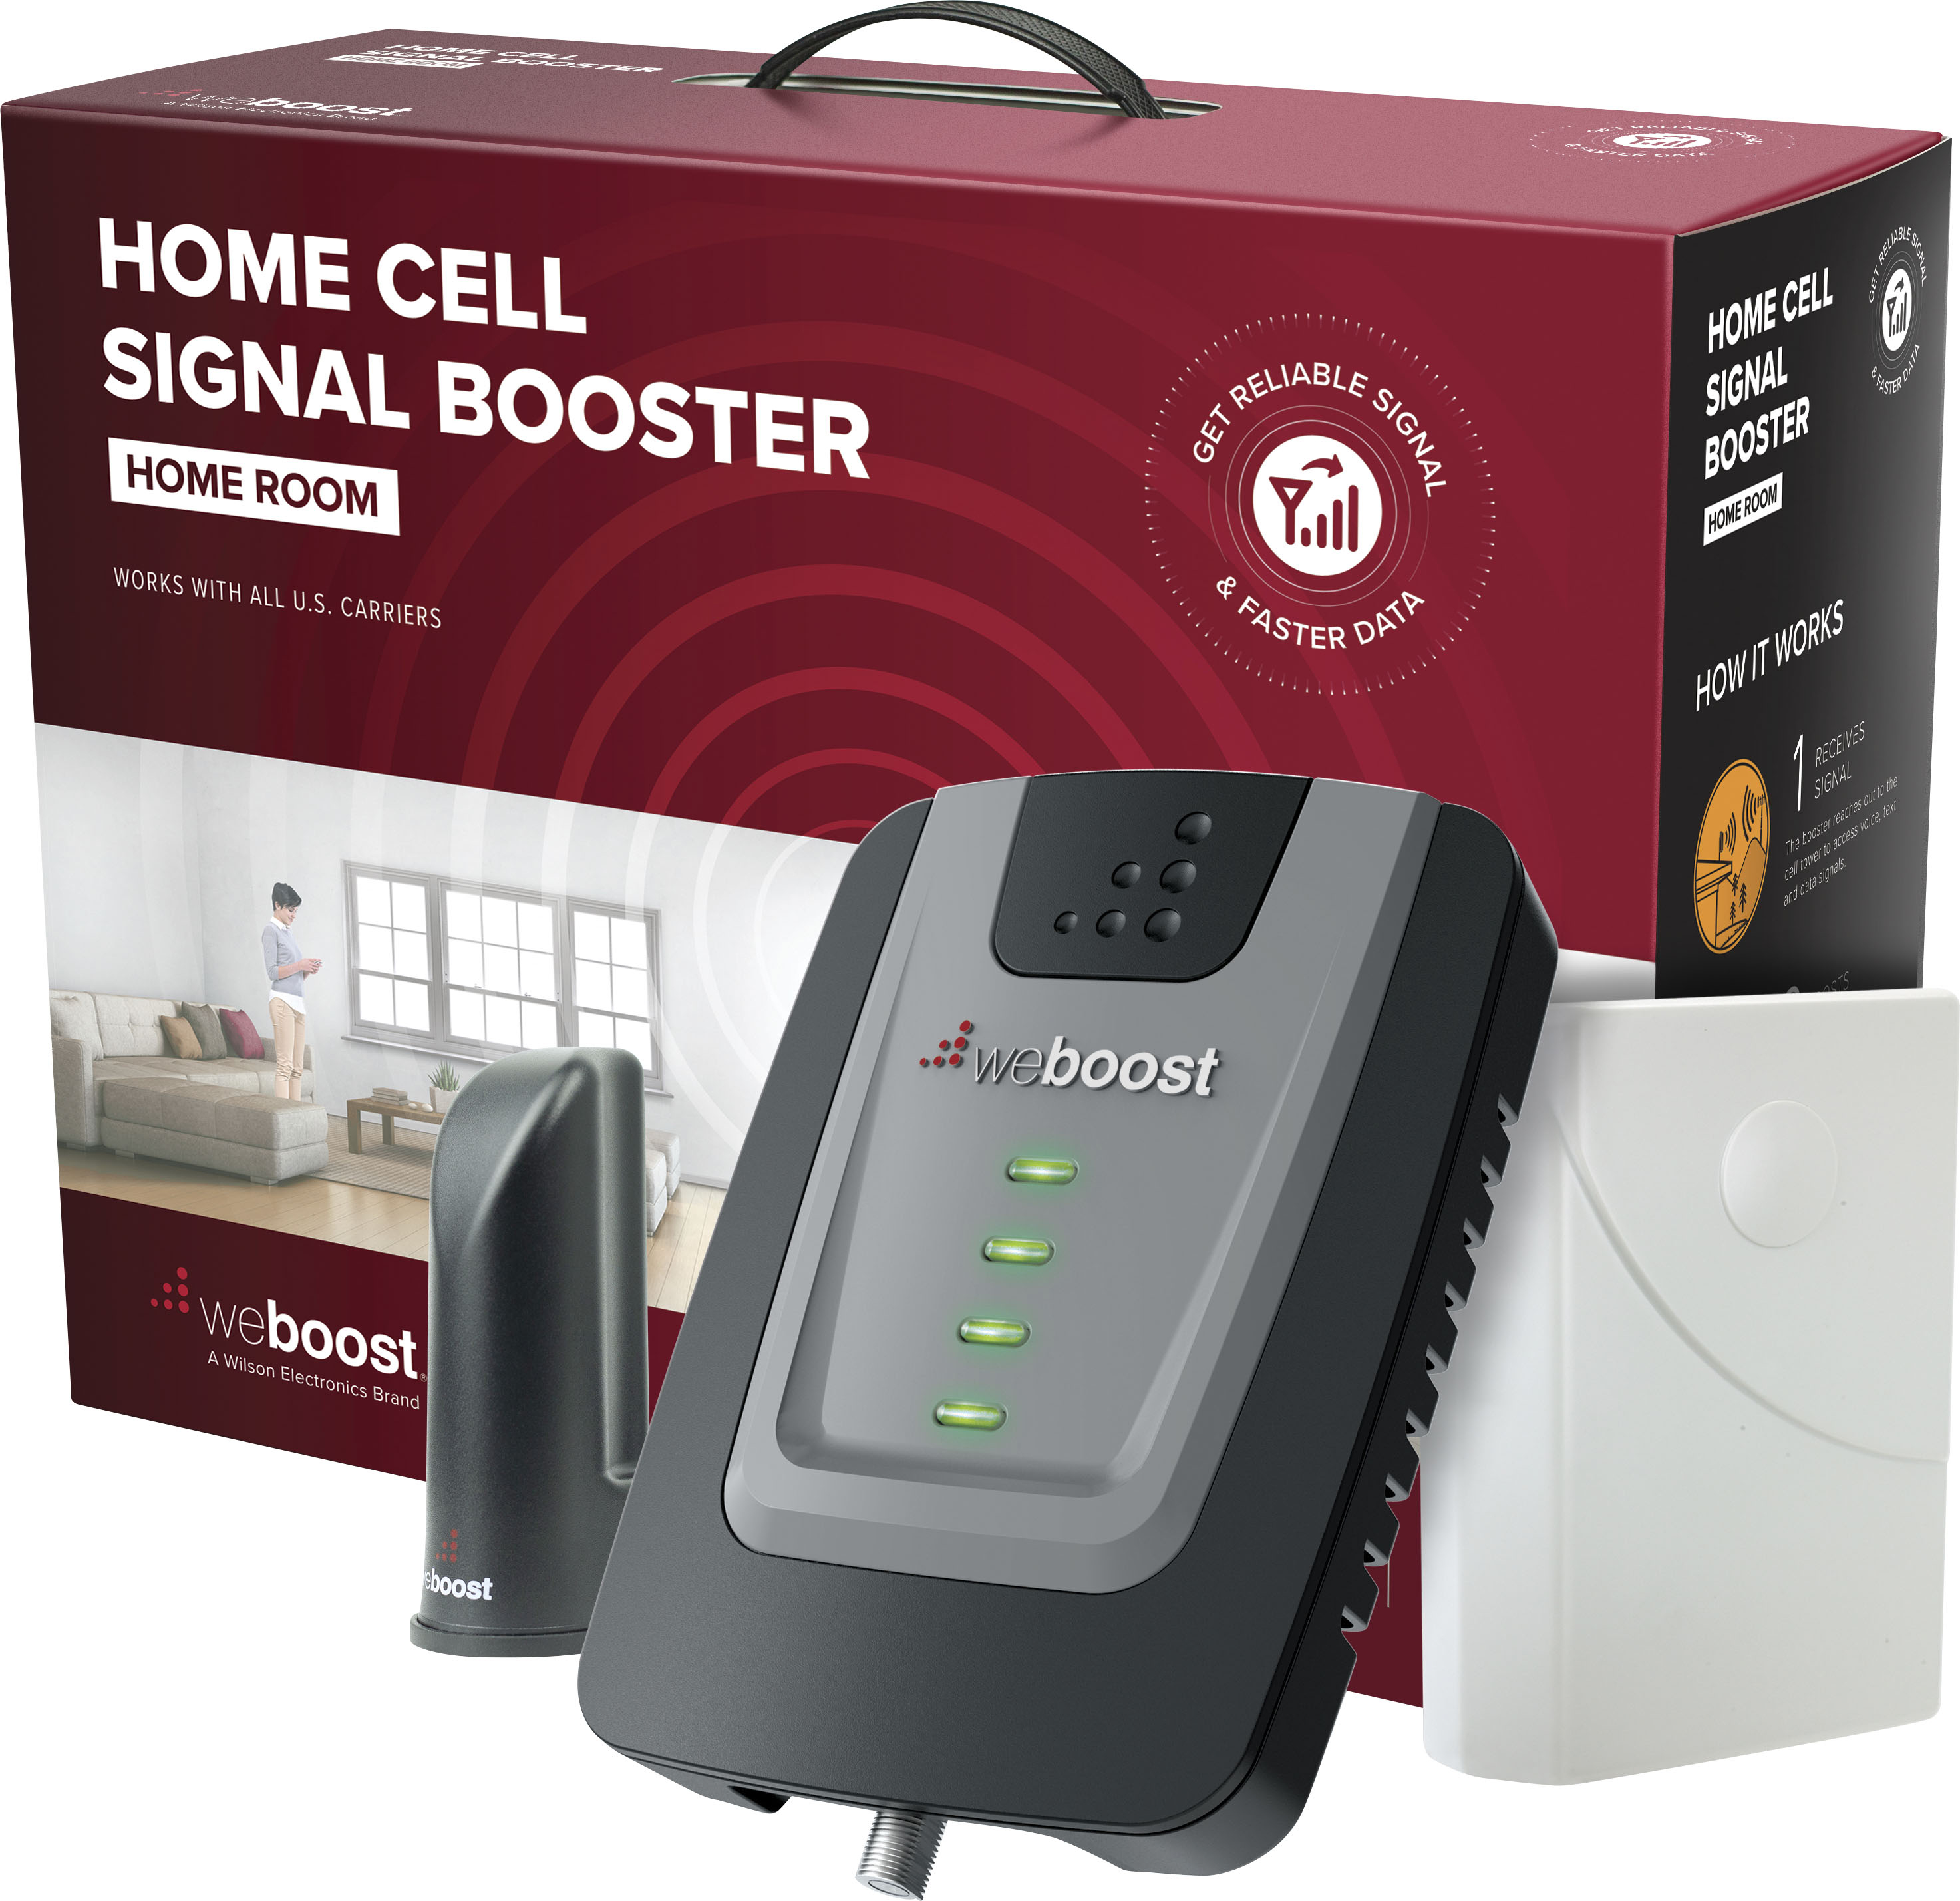 Angle View: weBoost - Home Room Cell Phone Signal Booster Kit for up to 1 Room, Boosts 4G LTE & 5G for all U.S. Networks & Carriers - Black